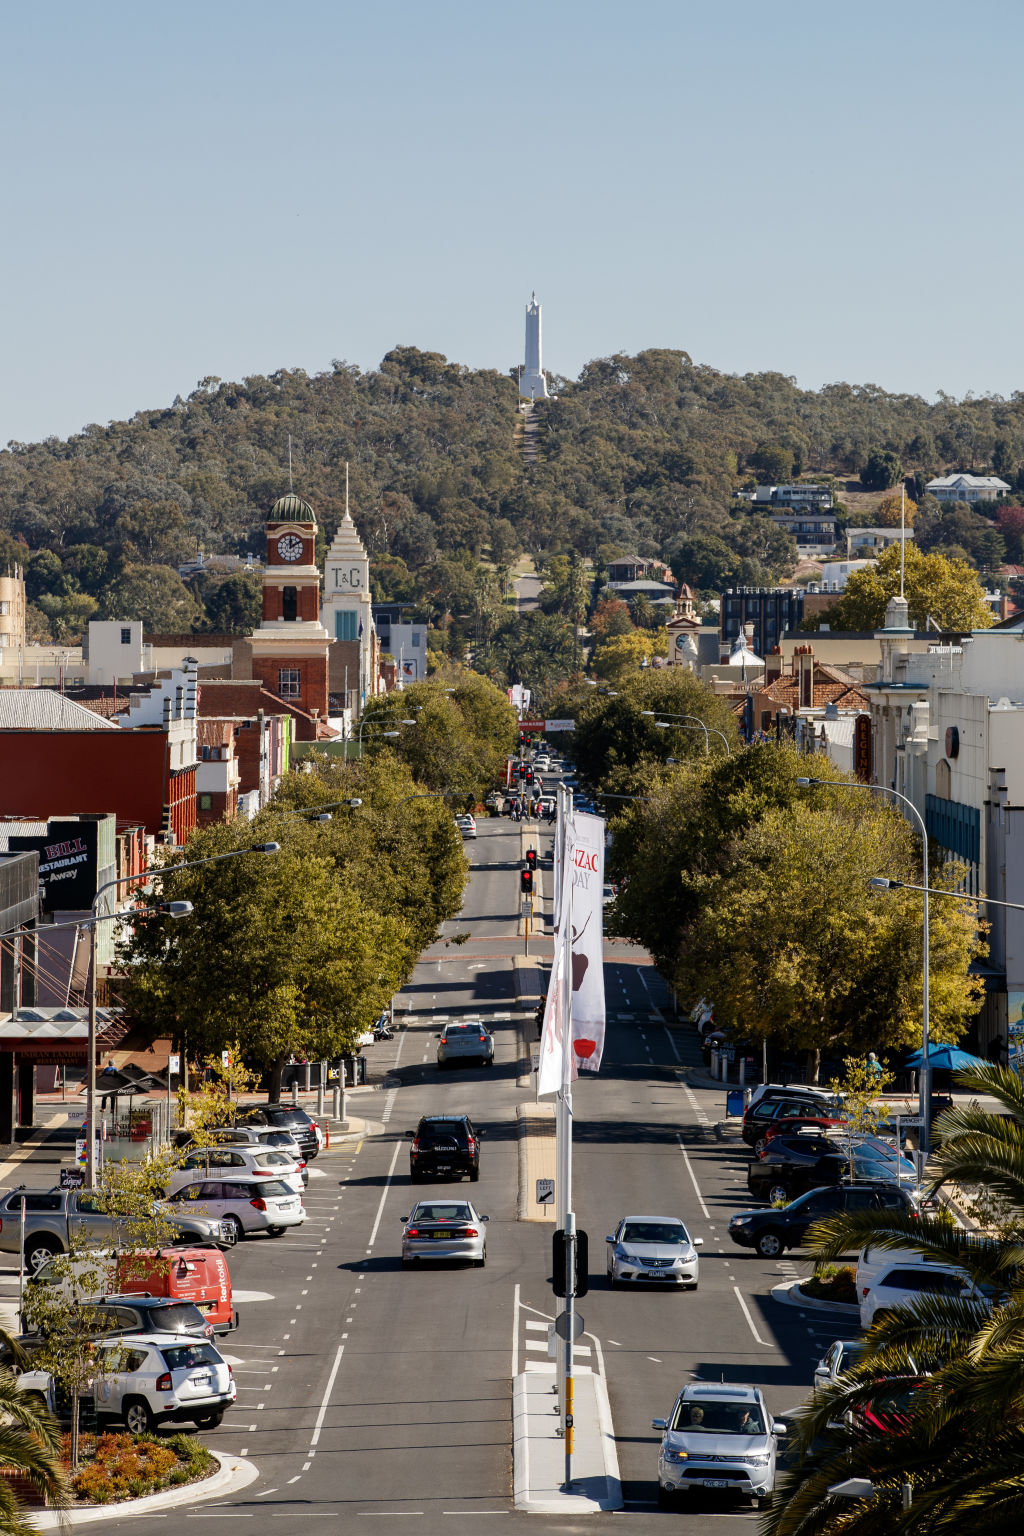 Albury's relatively affordable house prices have seen it become a popular tree-change destination. Photo: James Horan